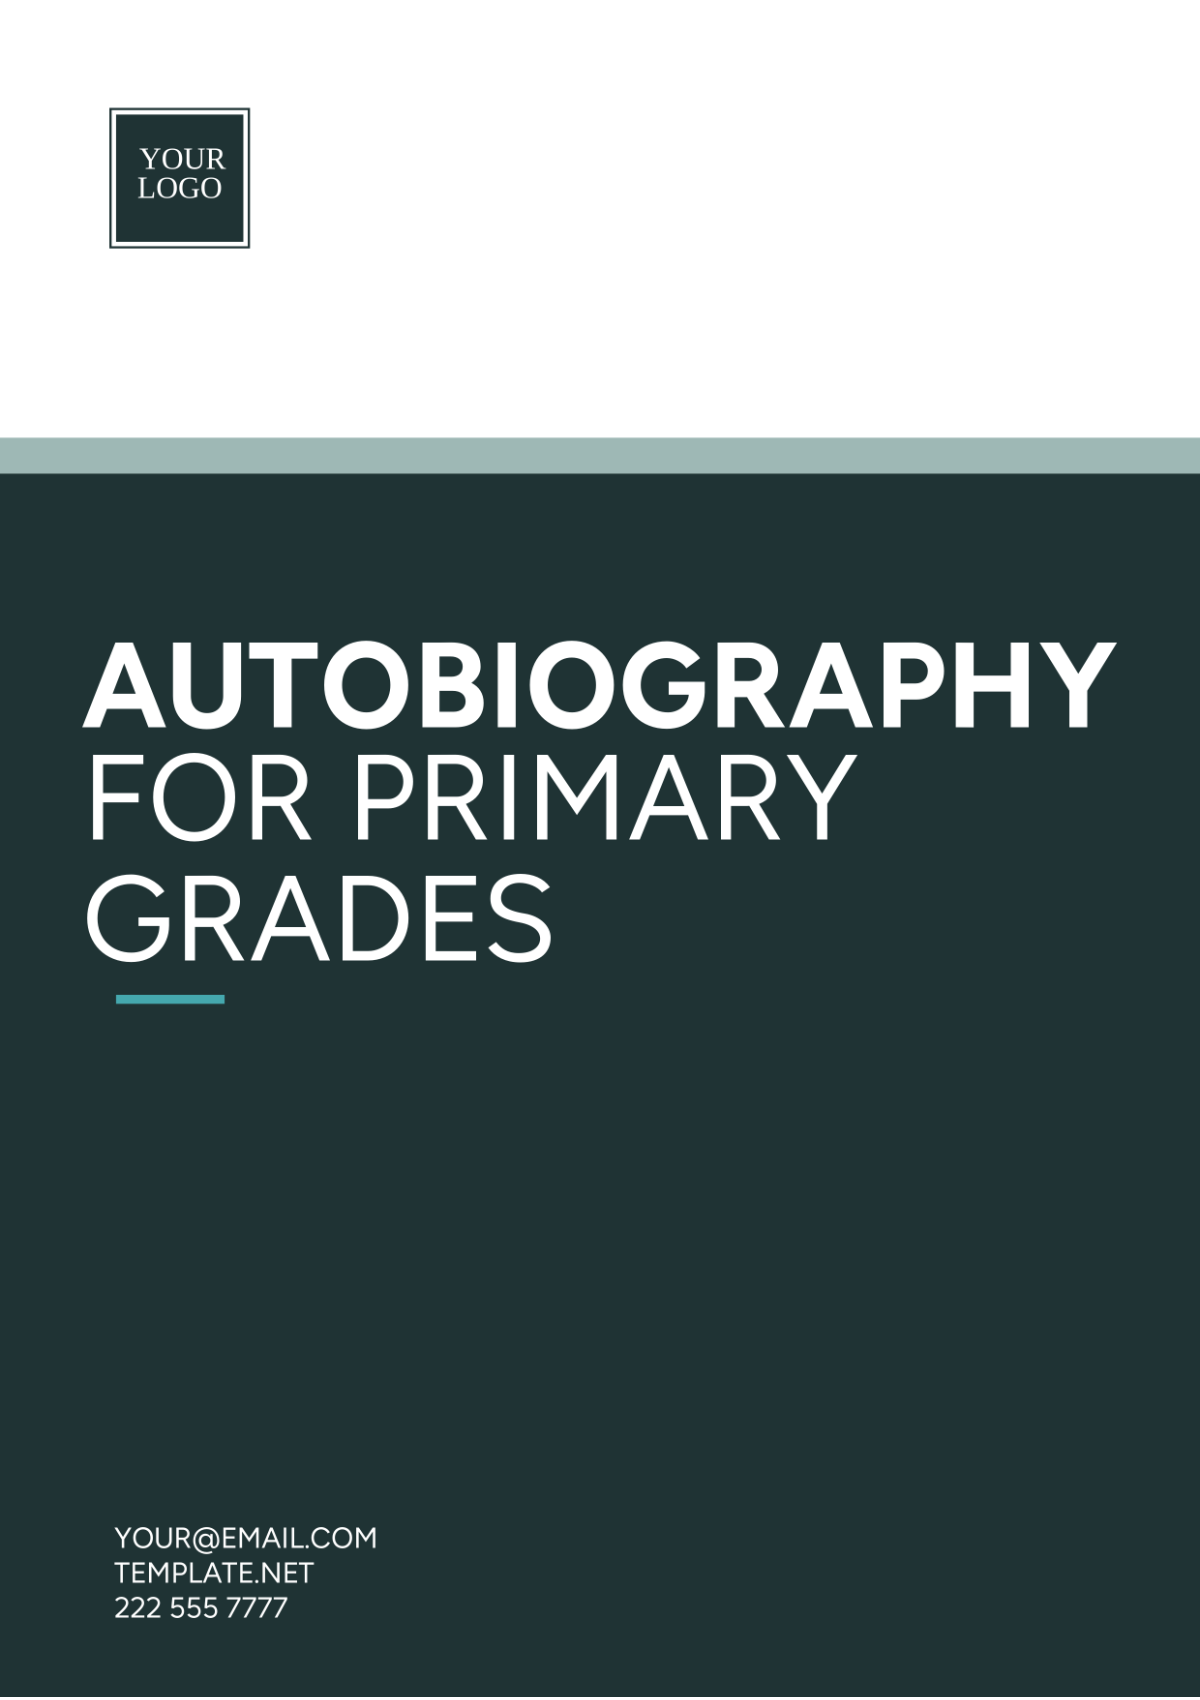 Free Autobiography Template for Primary Grades